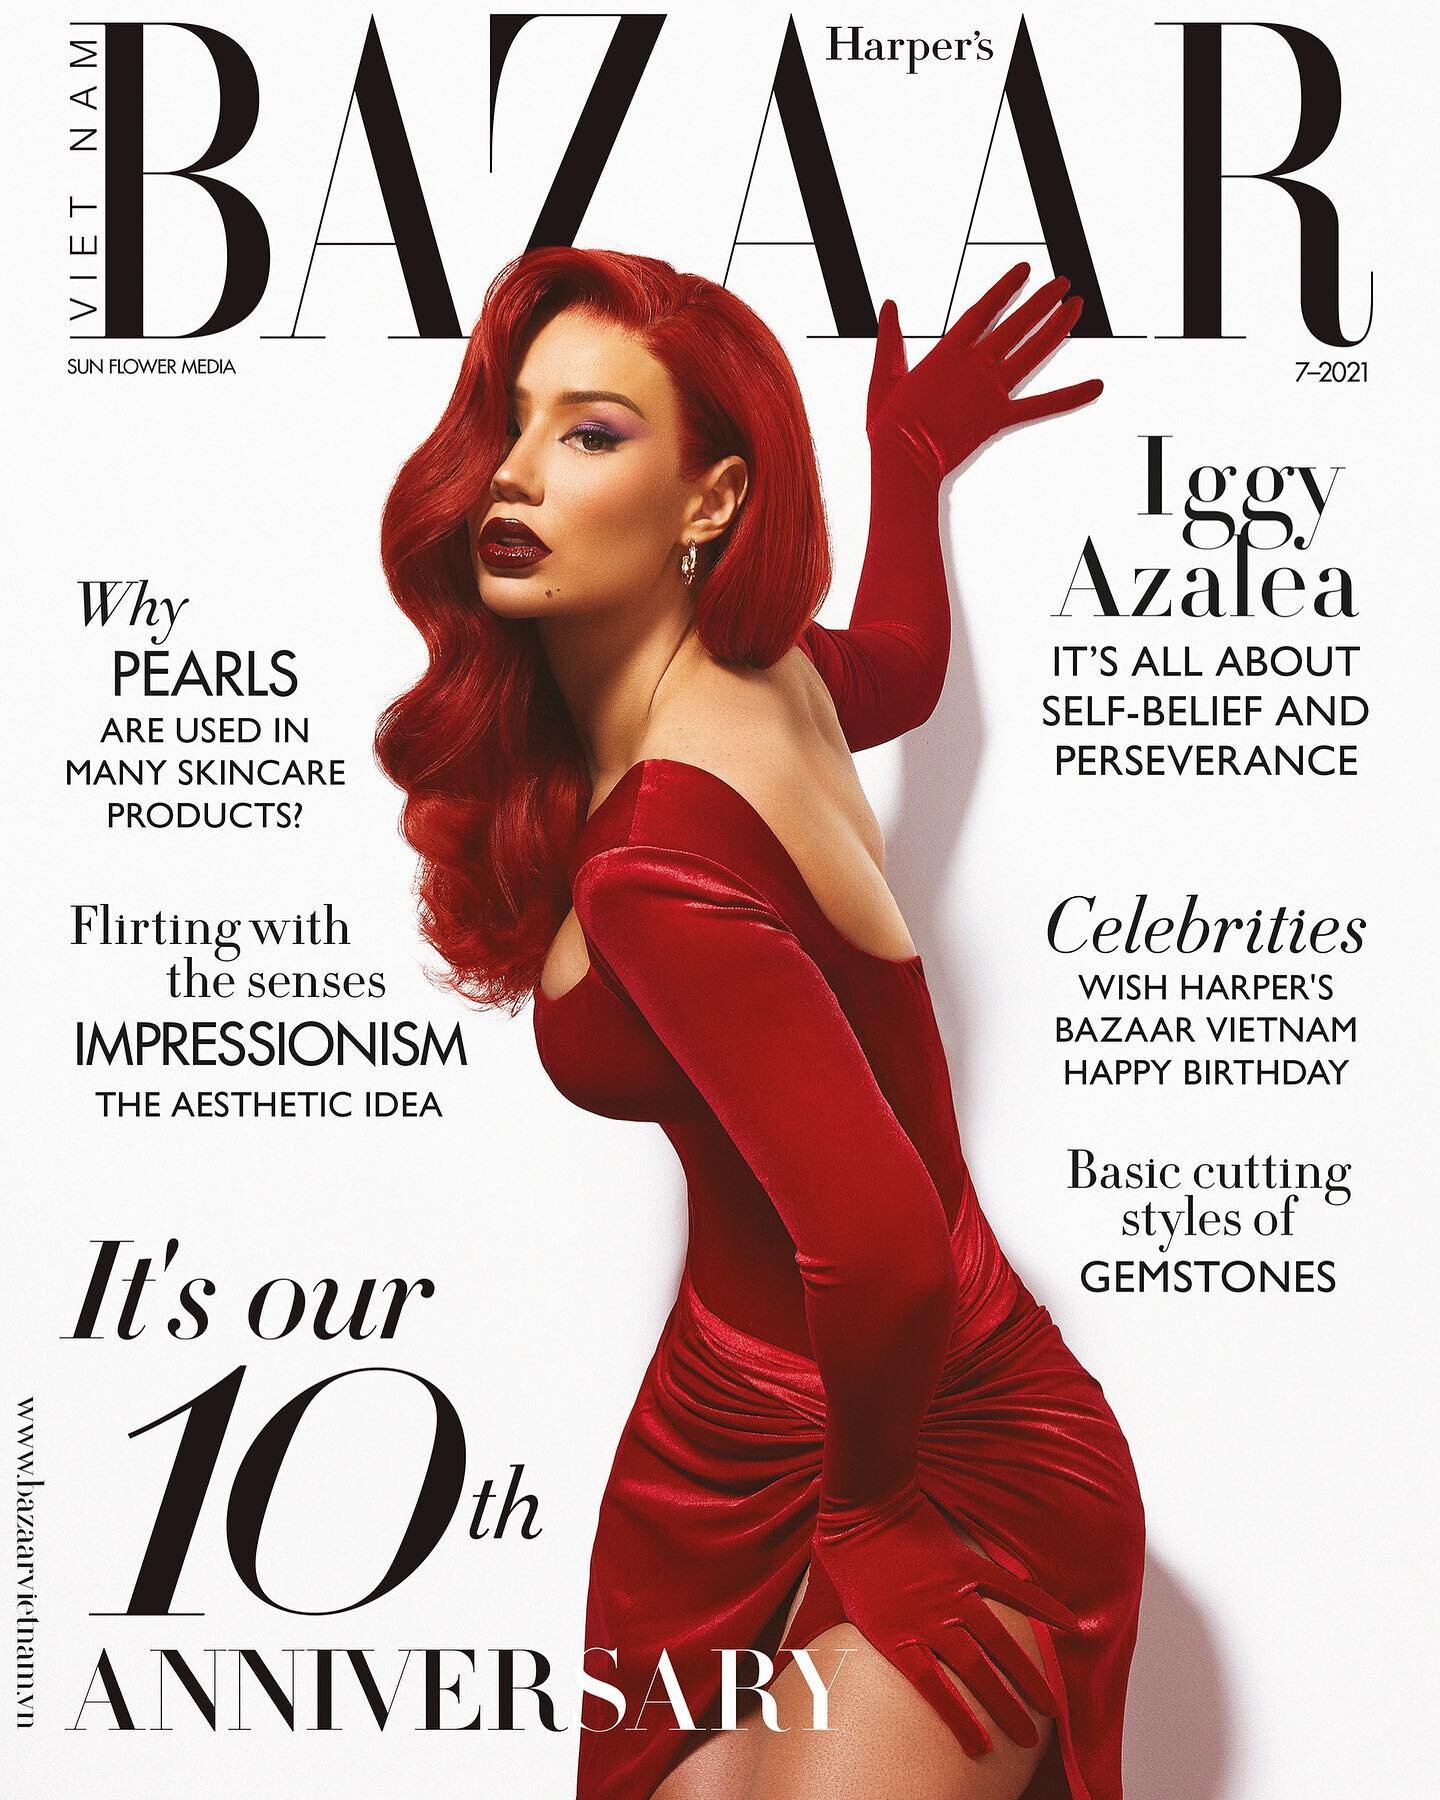 @thenewclassic for @bazaarvietnam 
❤️Channeling Jessica Rabbit for the 10th Anniversay issue! Thank you to the amazing team on this one ❤️

Styling: @wilfordlenov 
Beauty: @erosmua using @diormakeup 
Hair: @hairbyiggy at @forwardartists
Nails: @jen